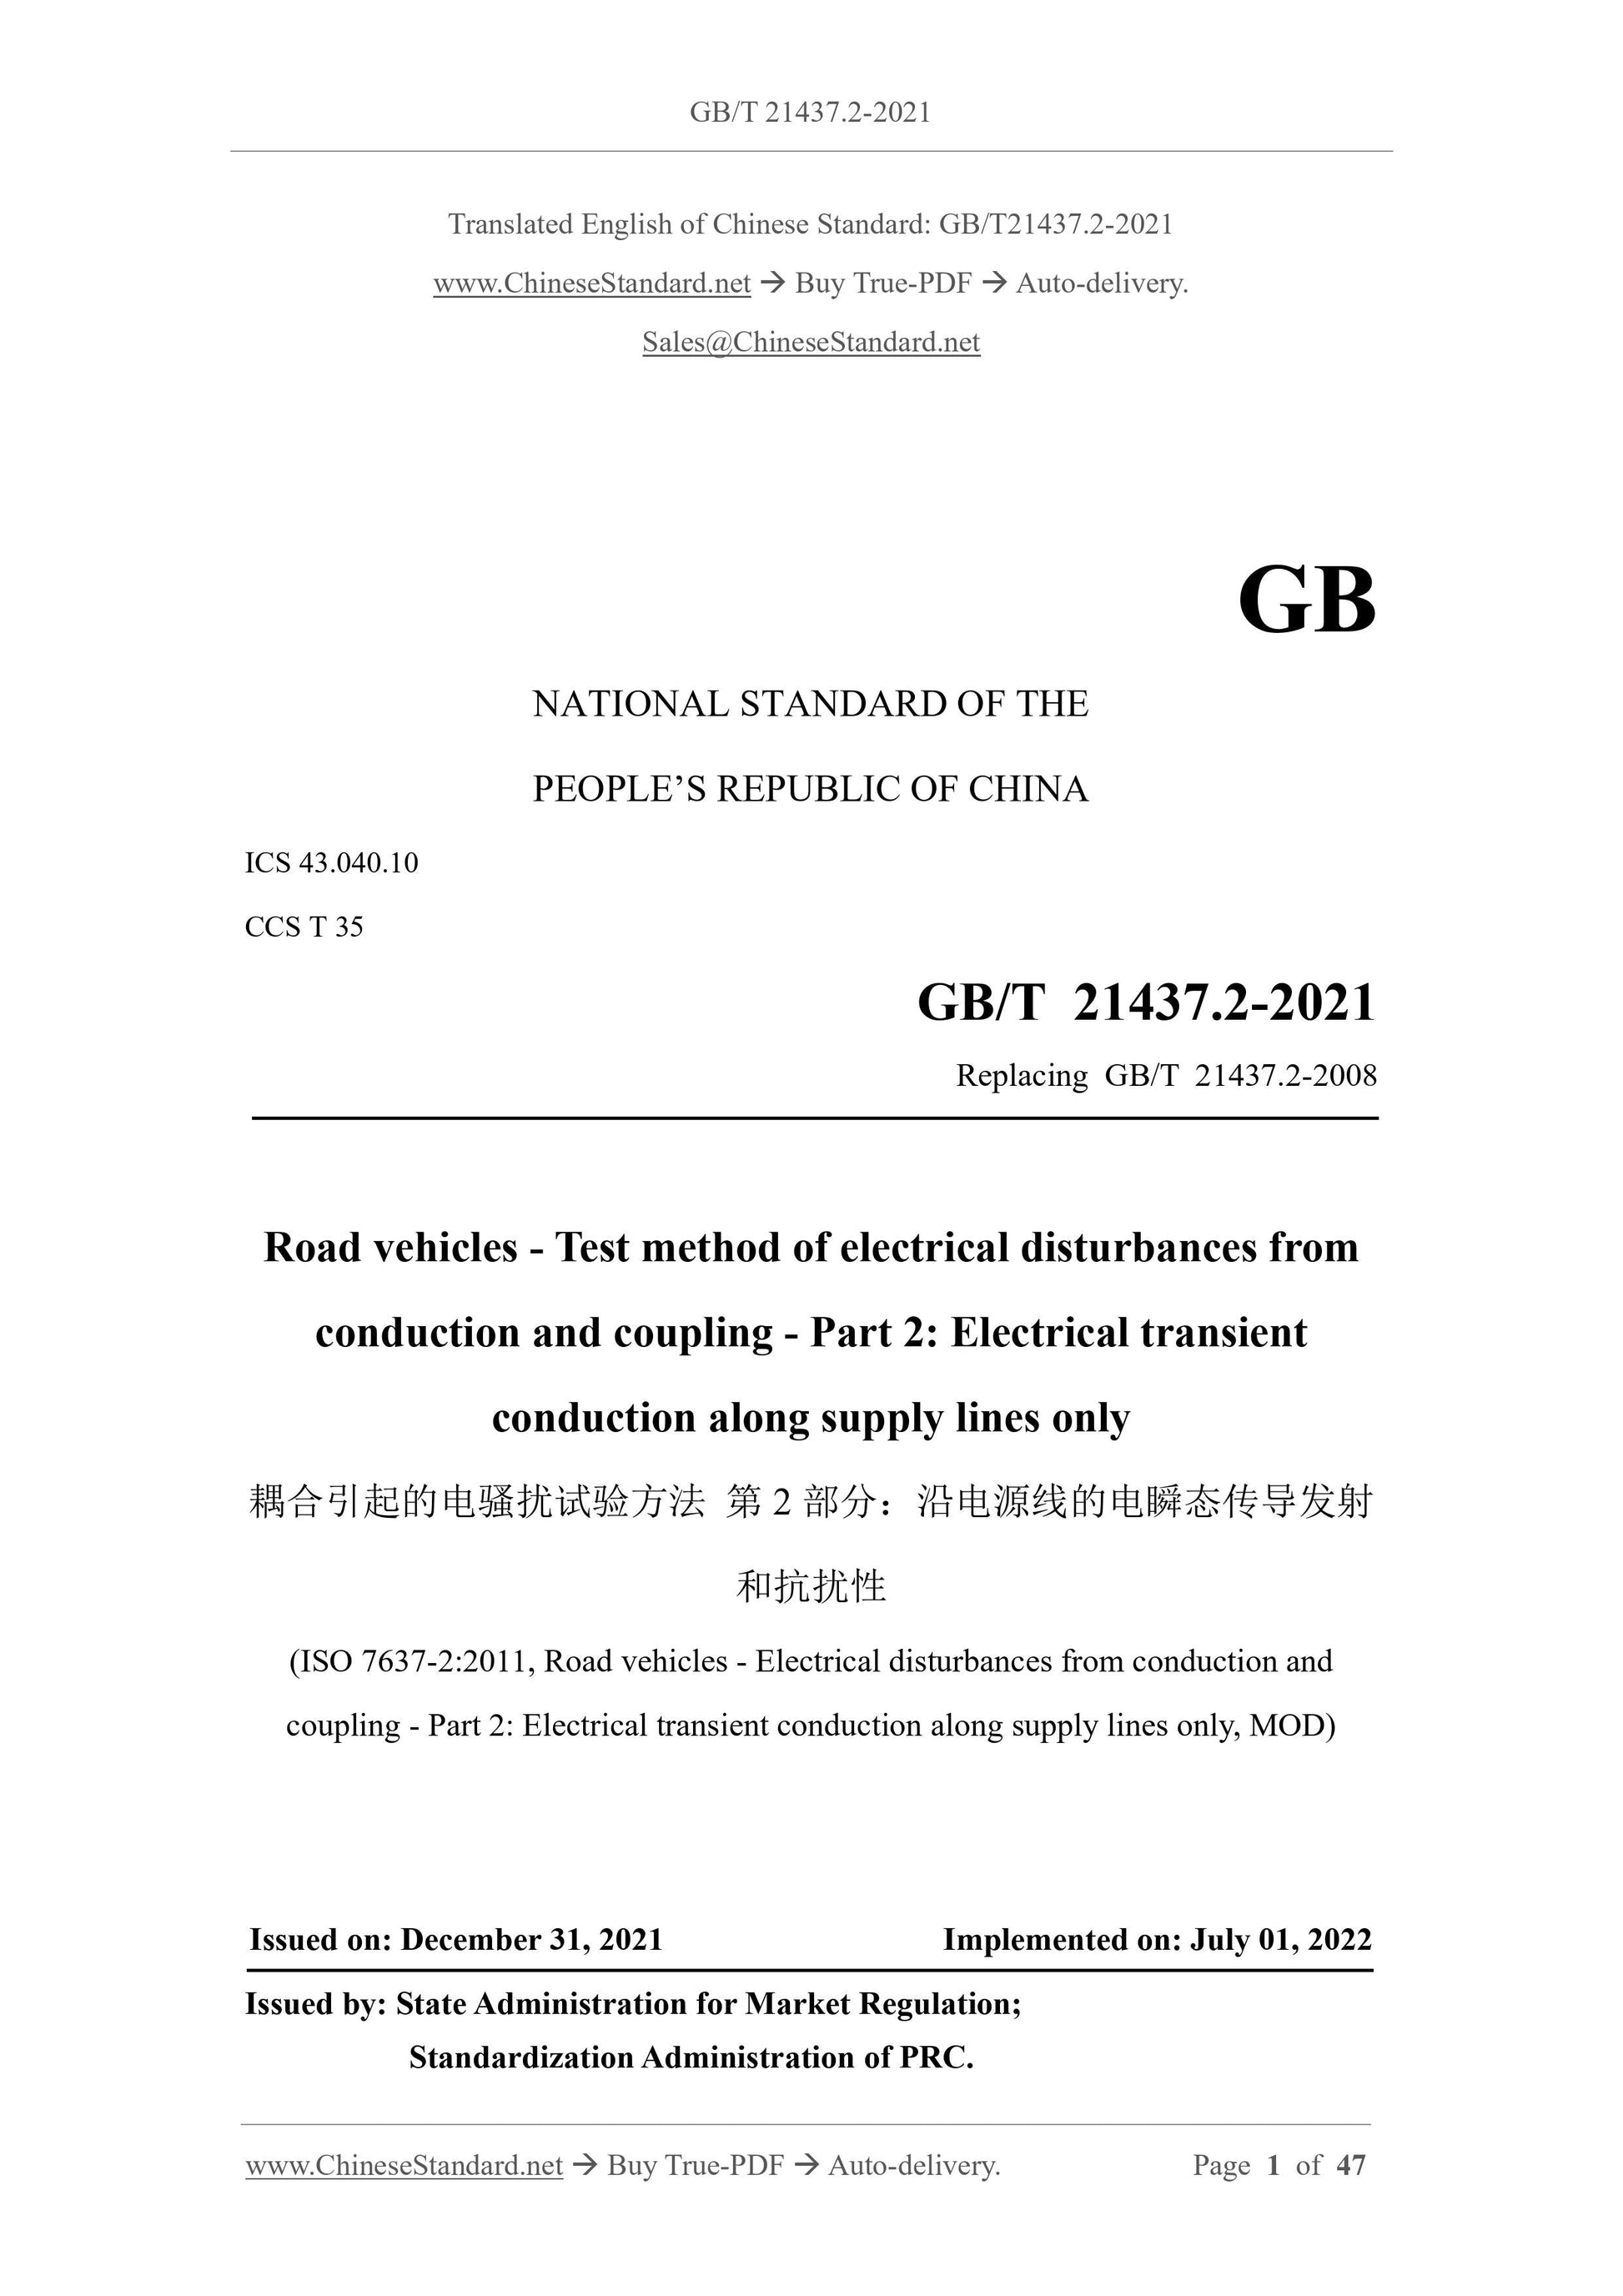 GB/T 21437.2-2021 Page 1